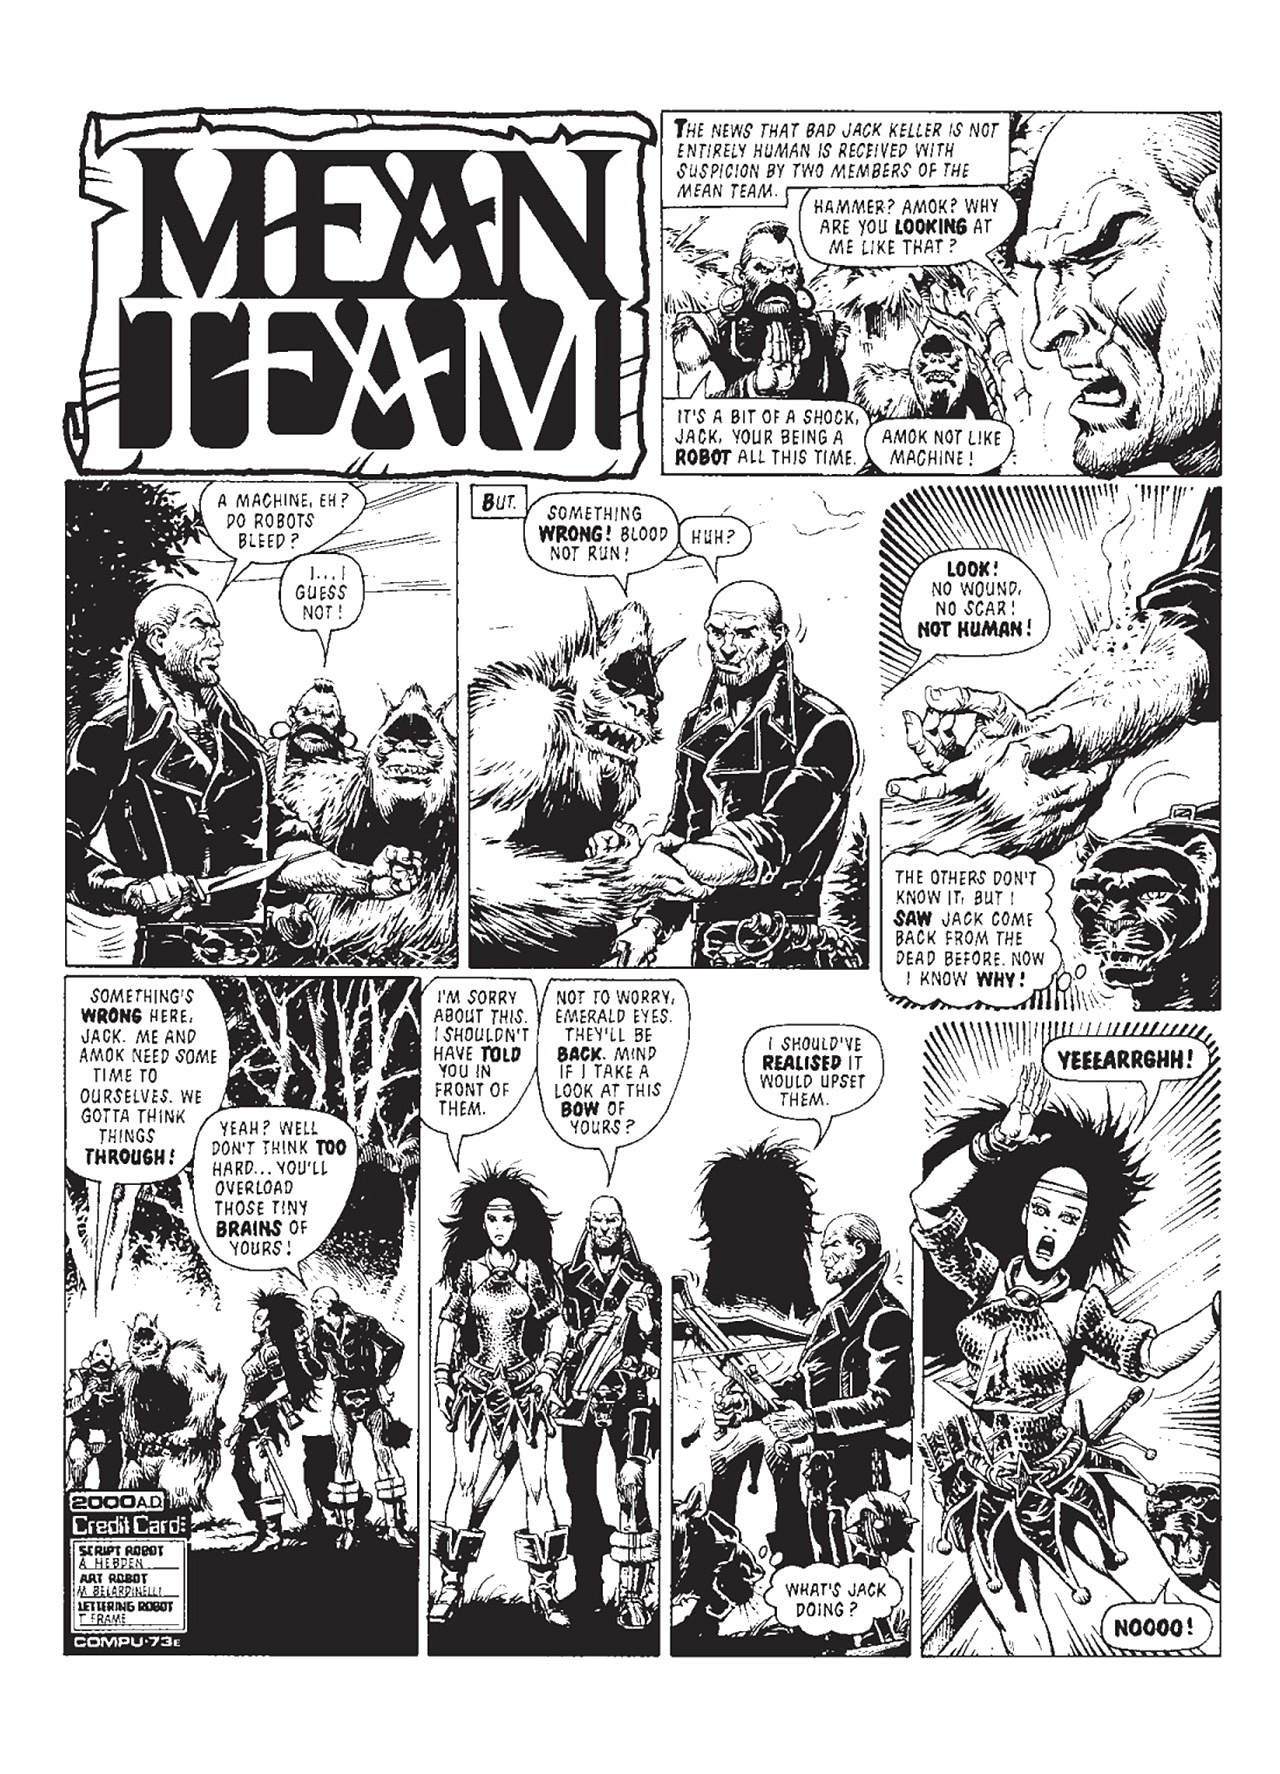 Read online Mean Team comic -  Issue # TPB - 125